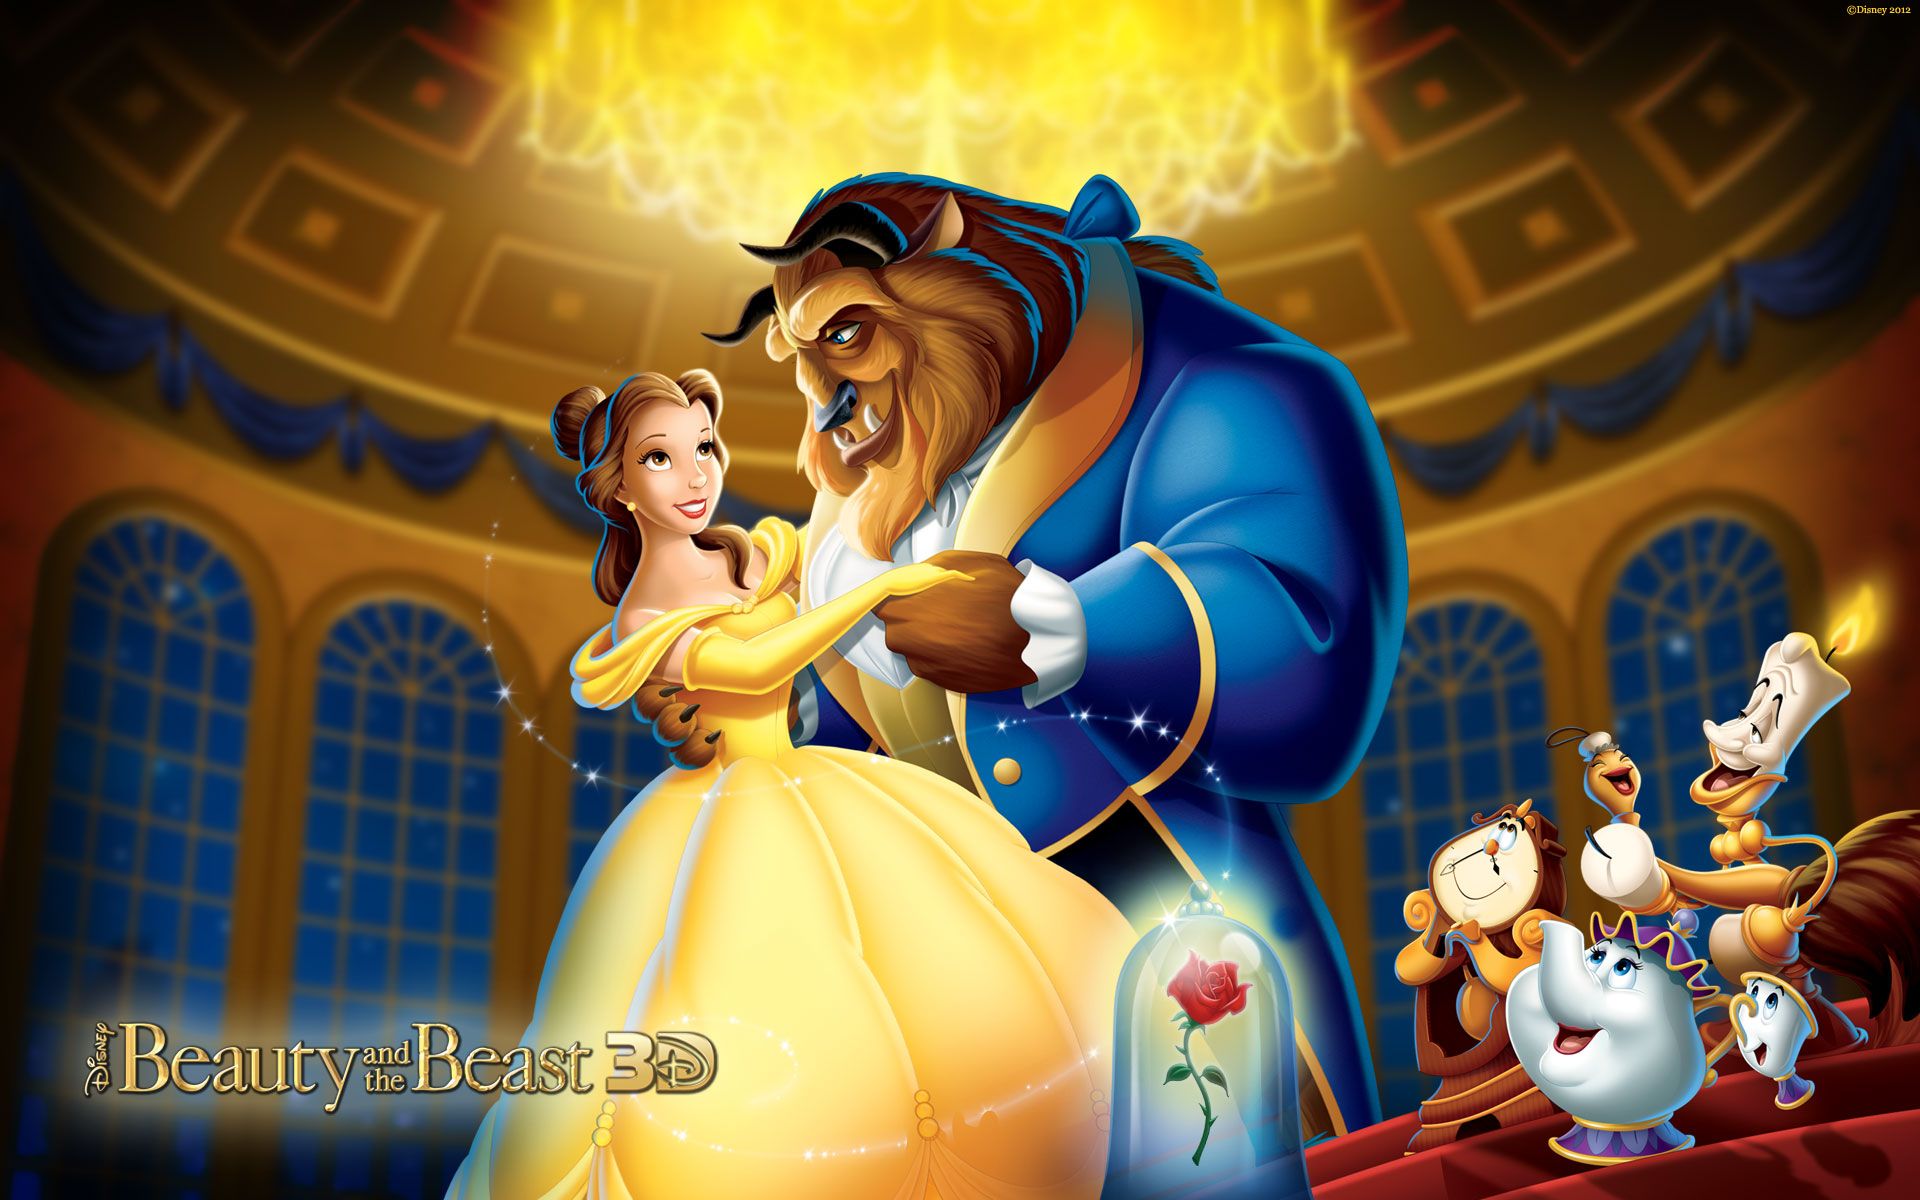 Beauty And The Beast Full Movie HD